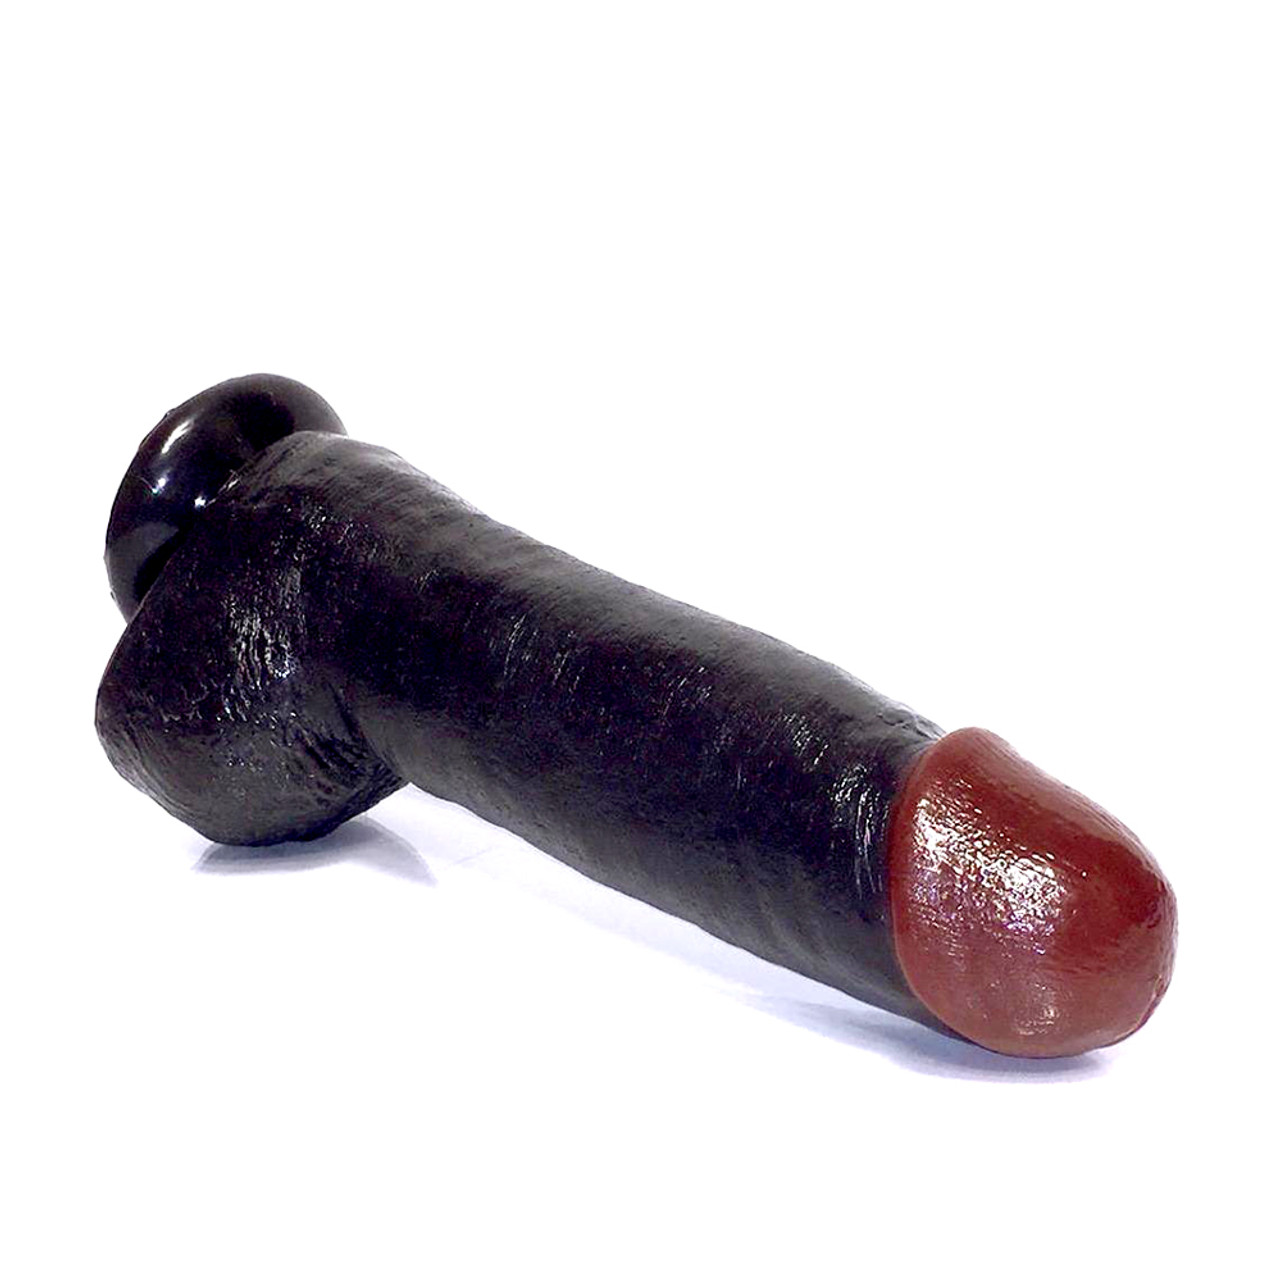 Buy the Chi Chi Larues Black Balled 12 inch Realistic Dildo with Suction Cup BBC Dong photo